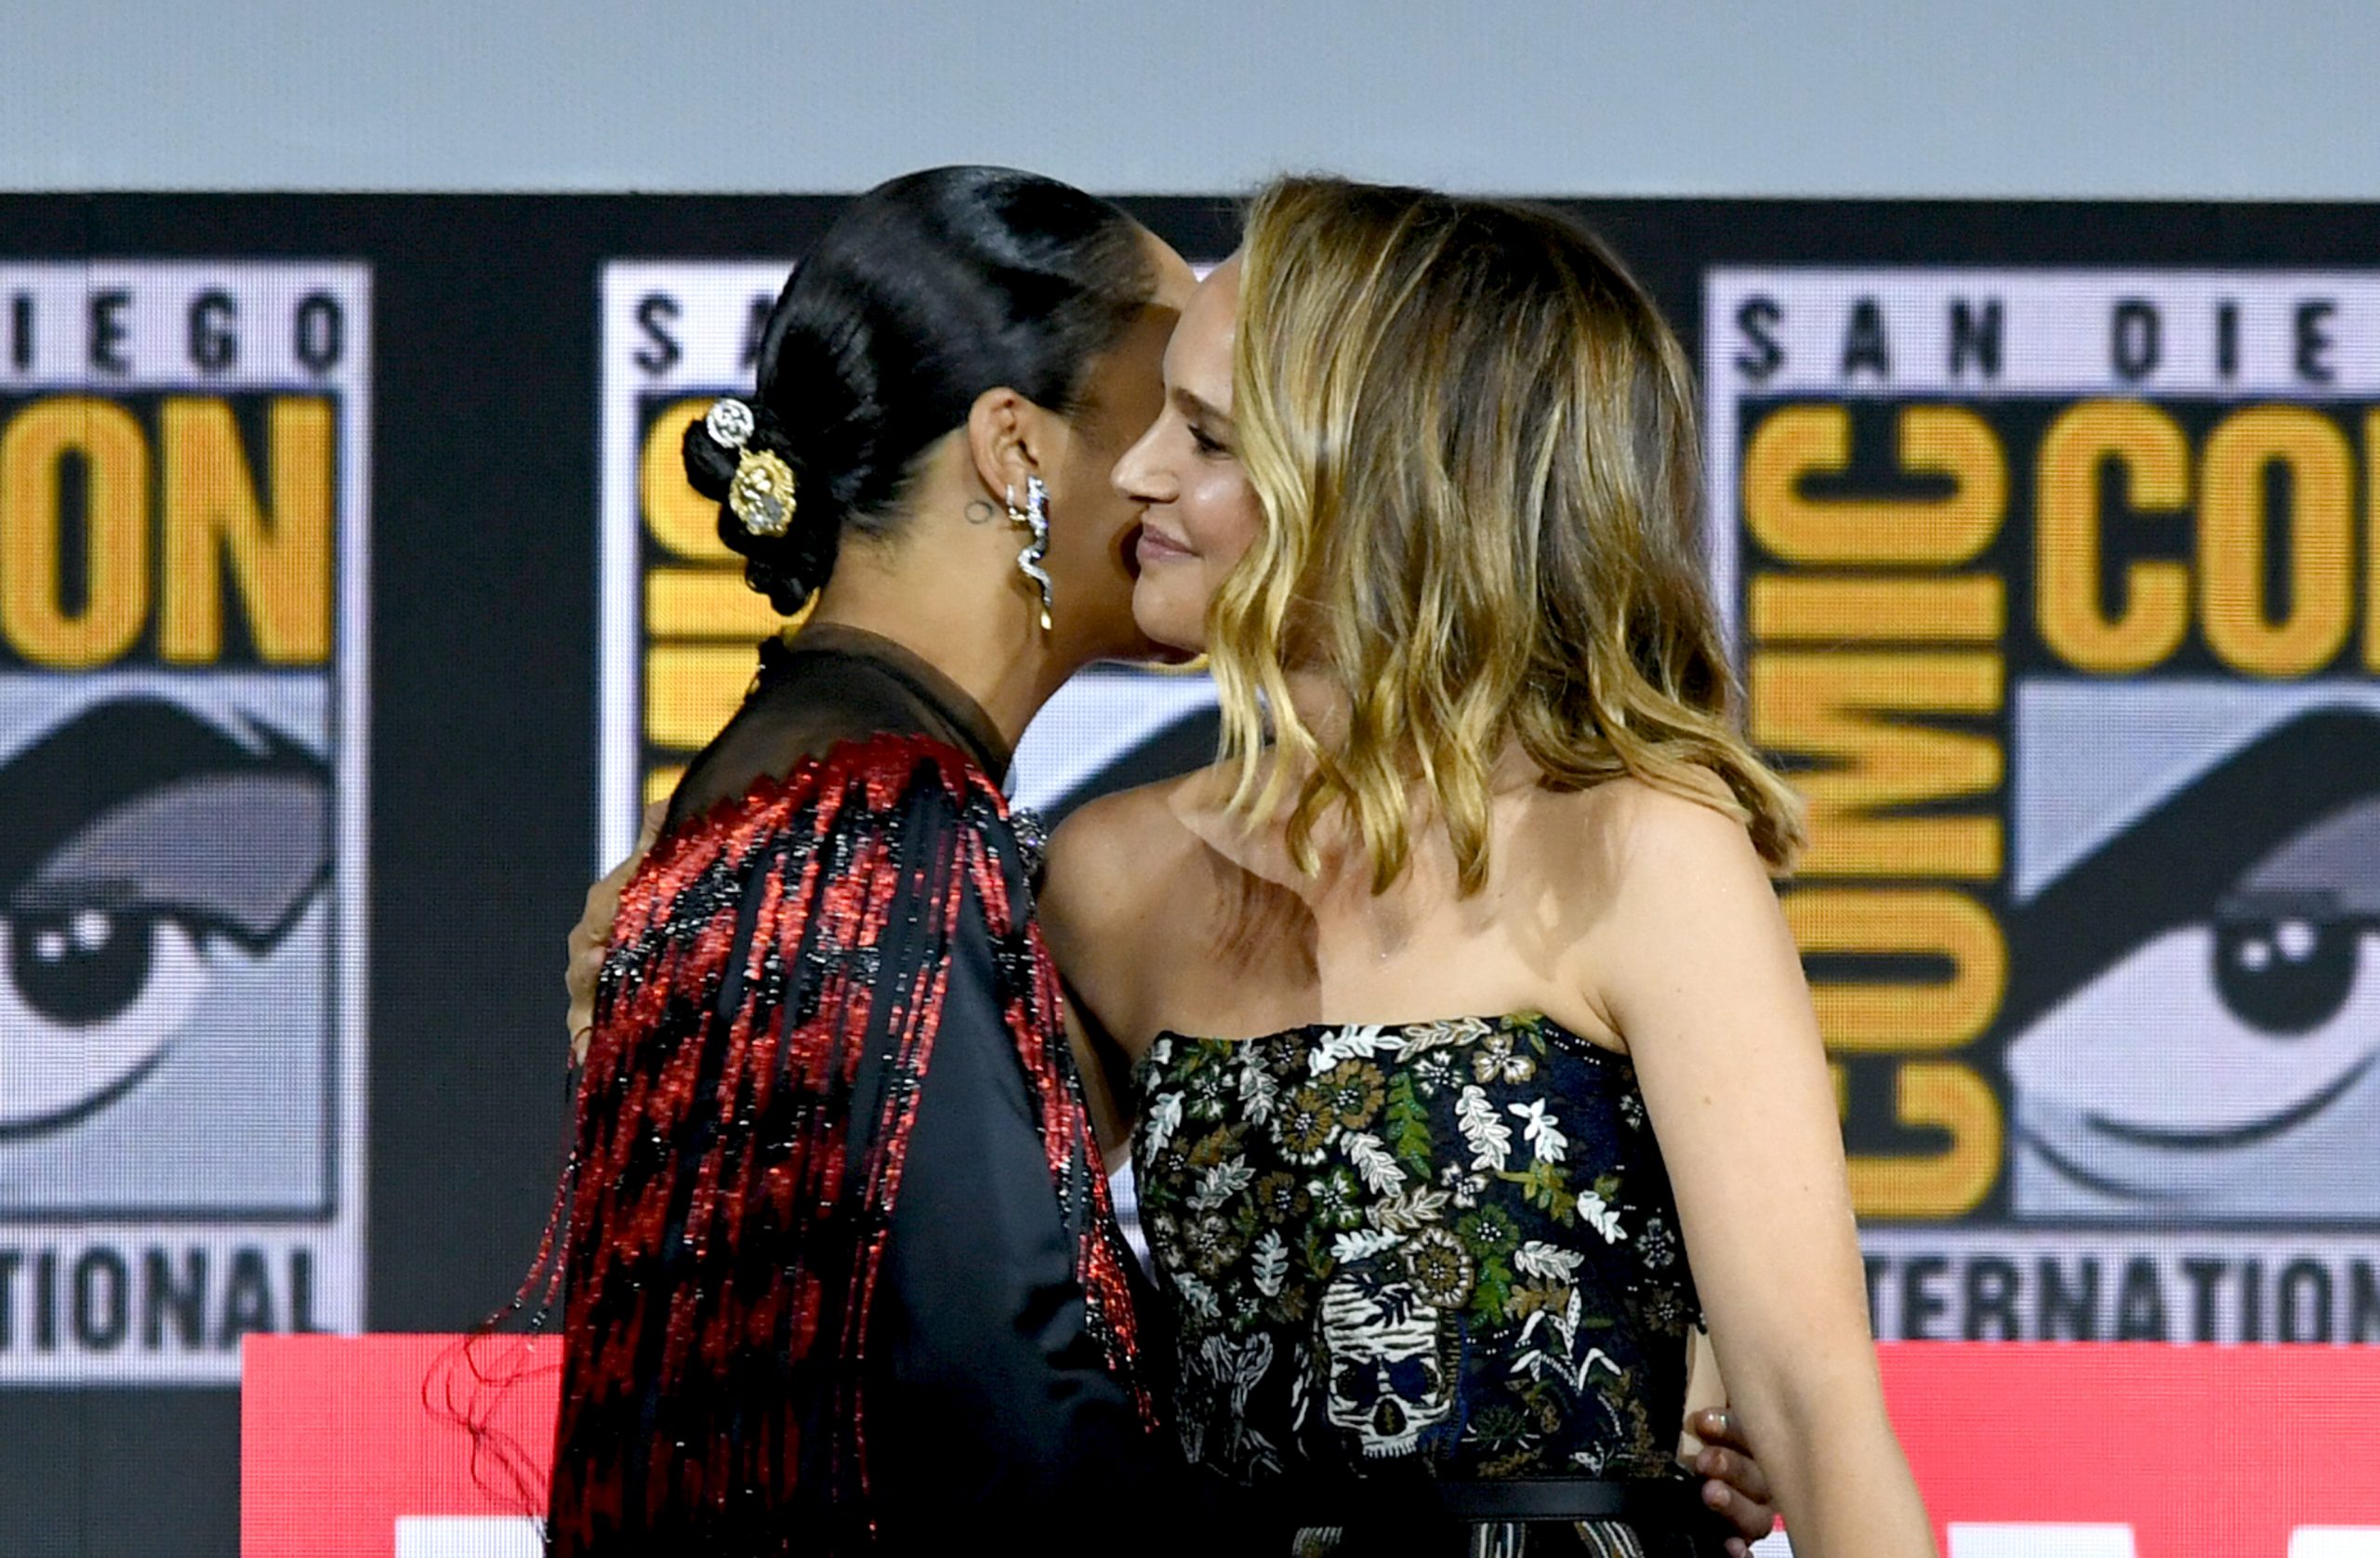 Tessa Thompson and Natalie Portman, who star in 'Thor: Love and Thunder,' embrace onstage at Comic-Con.